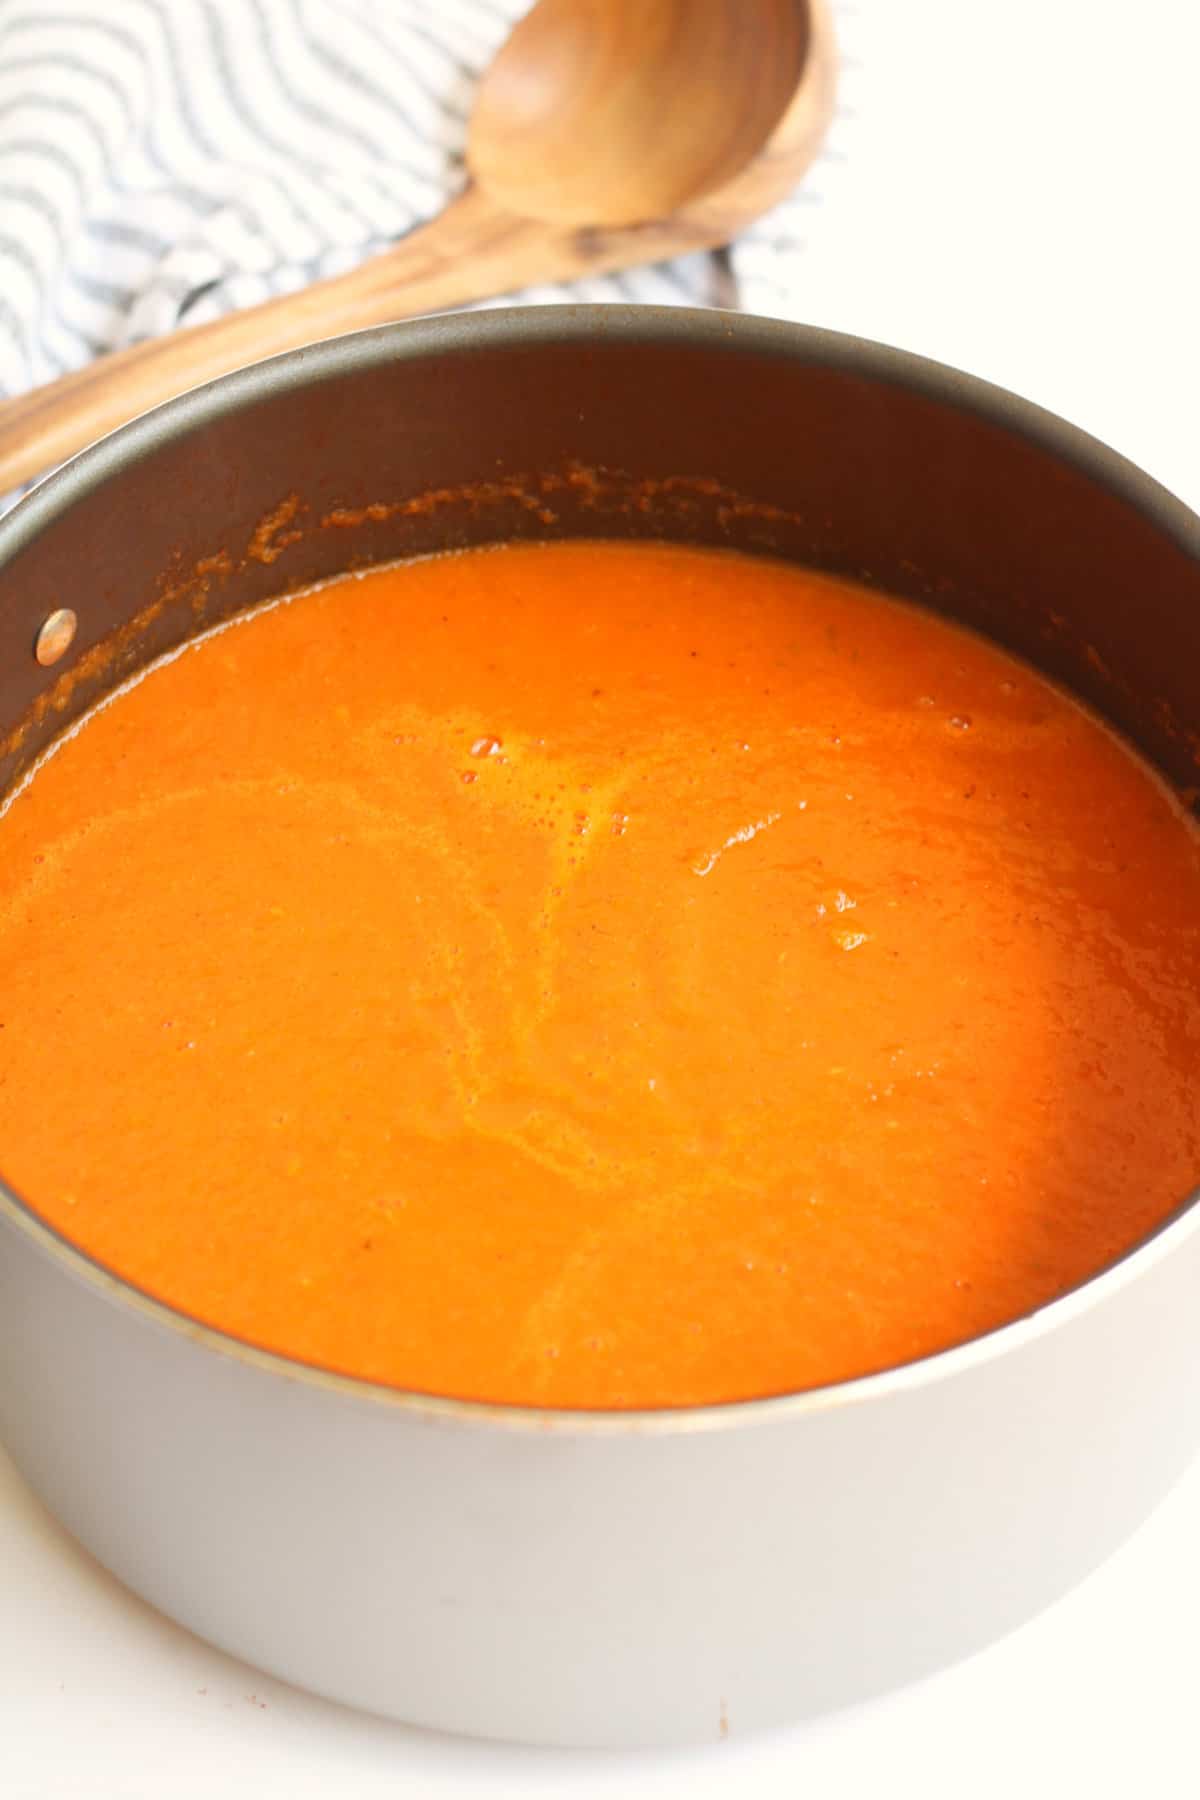 Dutch oven with tomato soup.